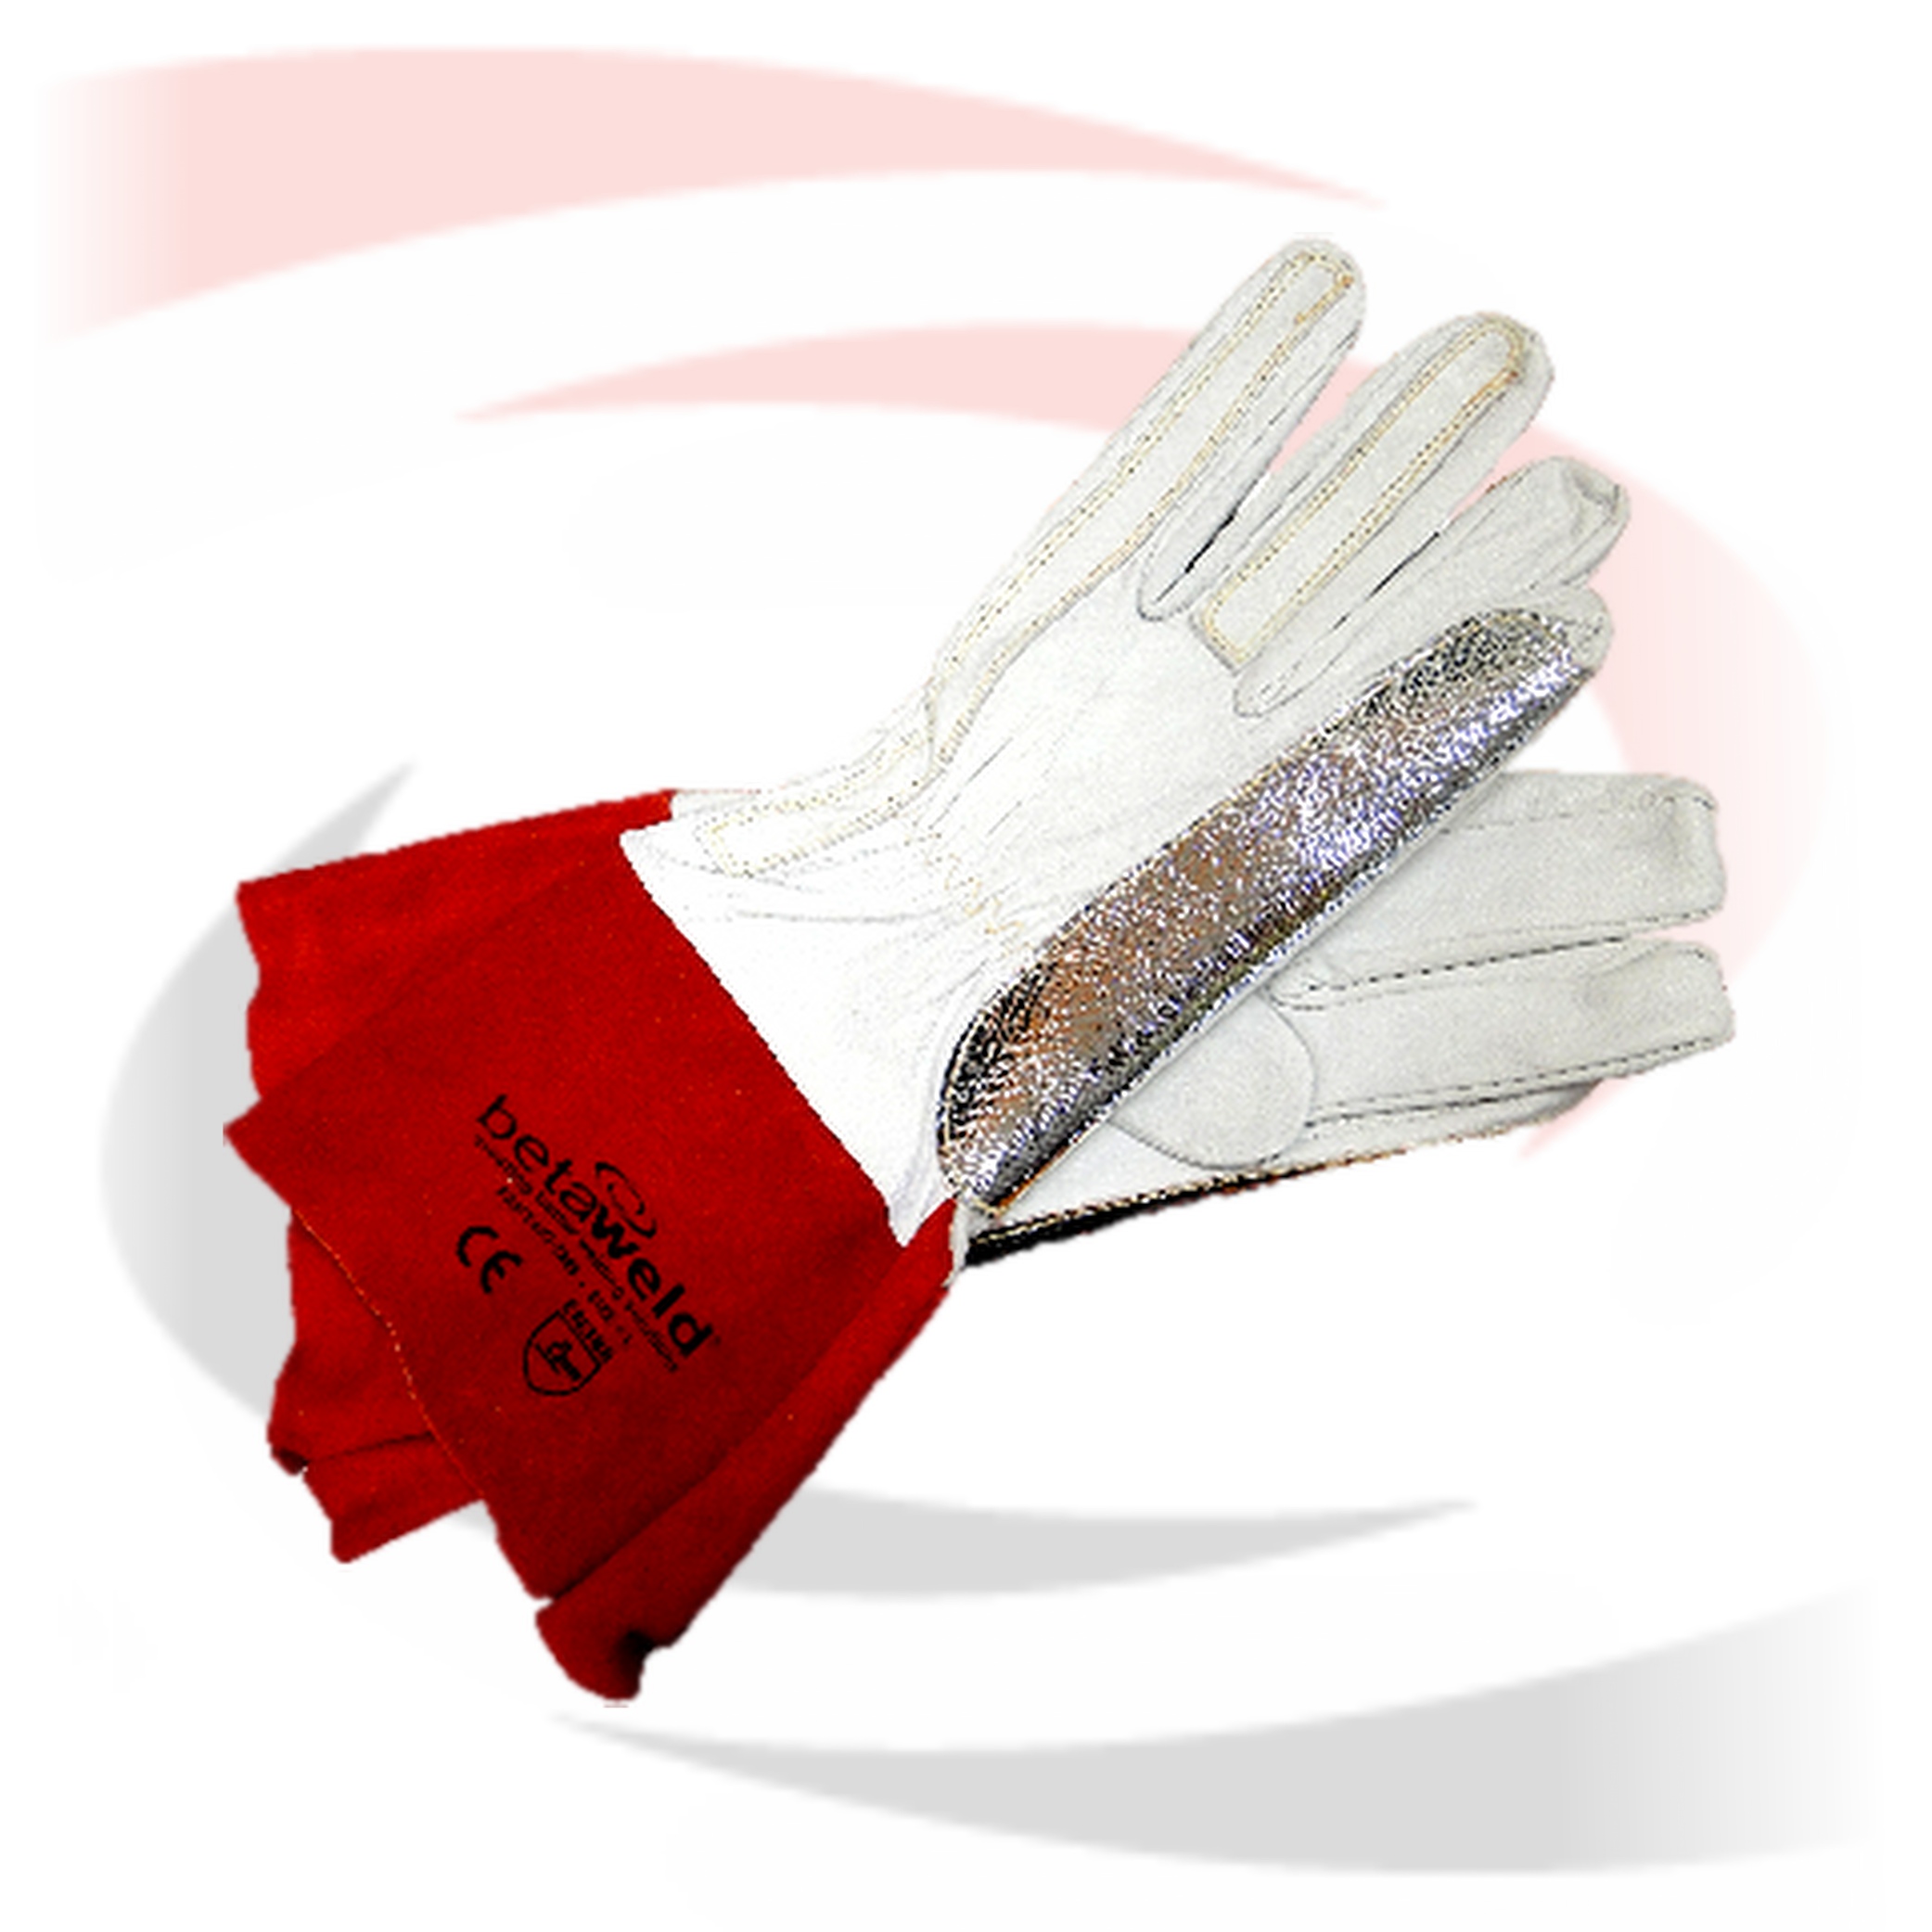 Durable for Working Heavy Duty BEETRO Welding Gloves Cowhide Leather 